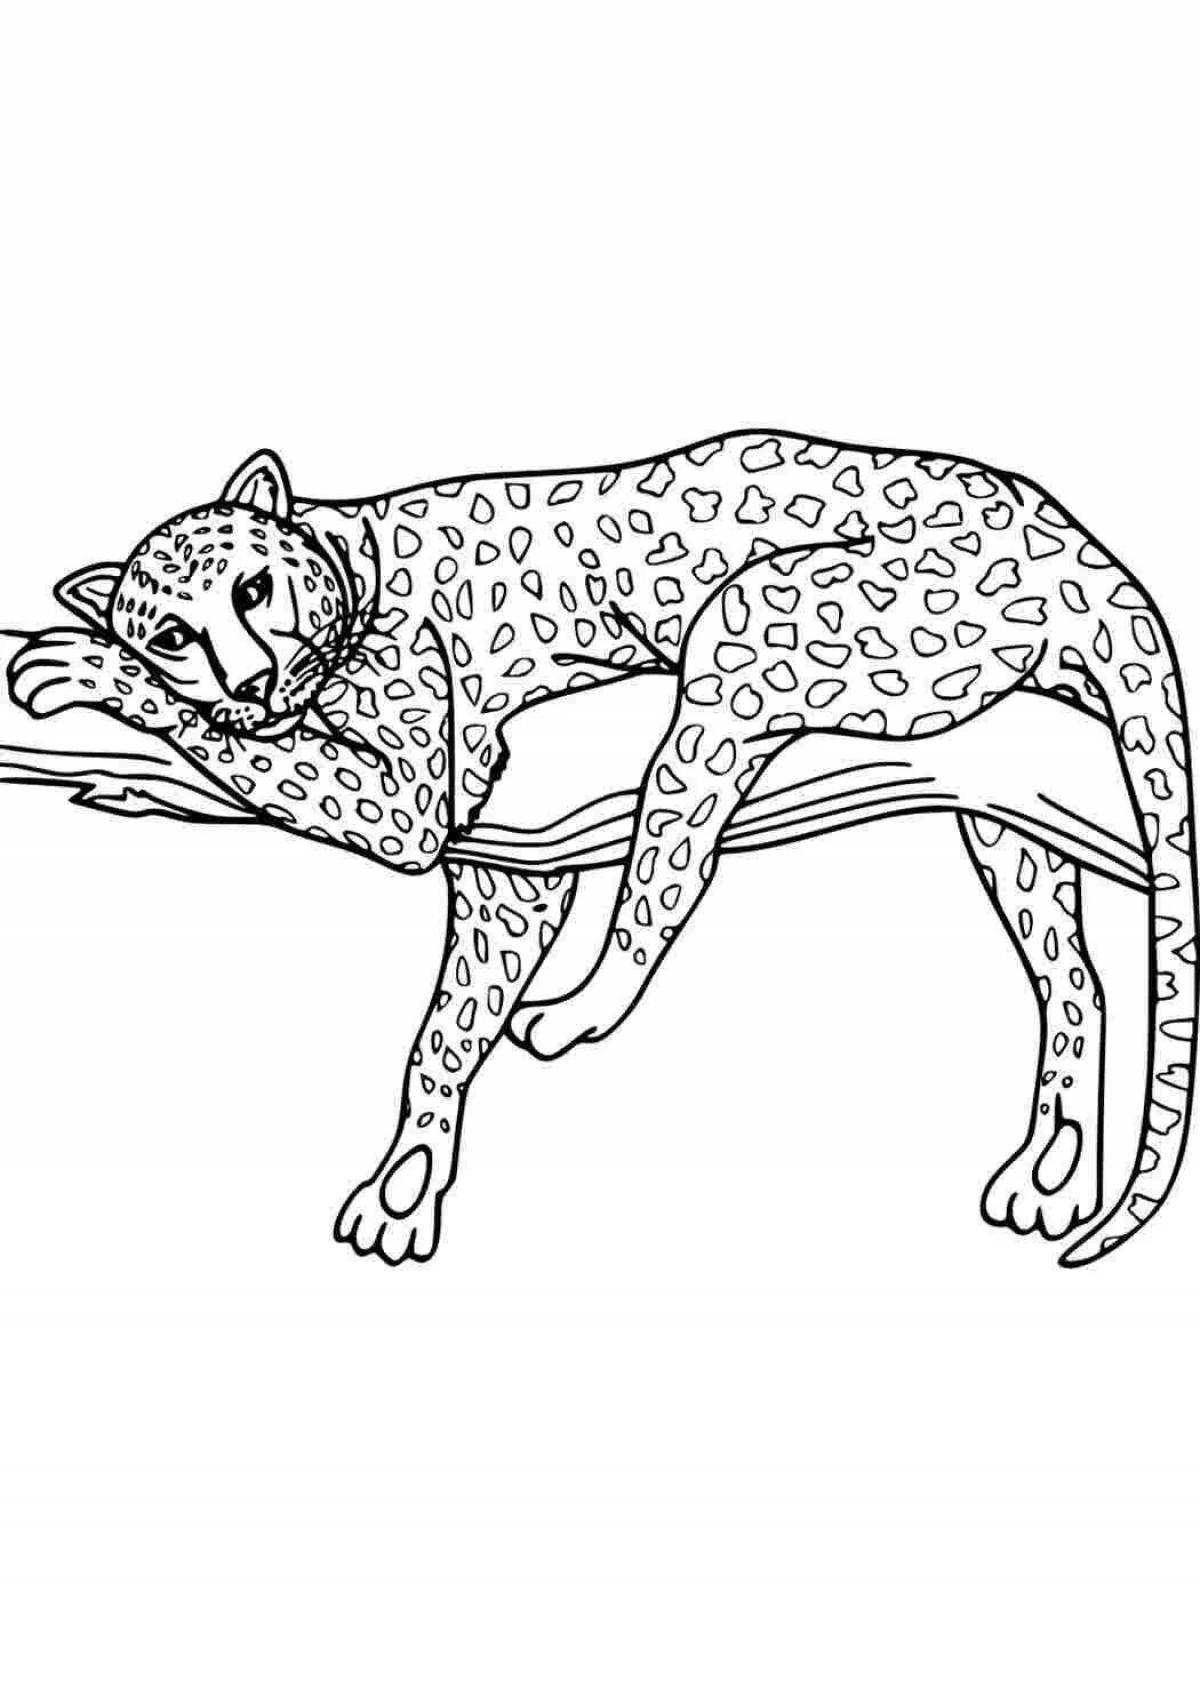 Coloring pages of carnivores